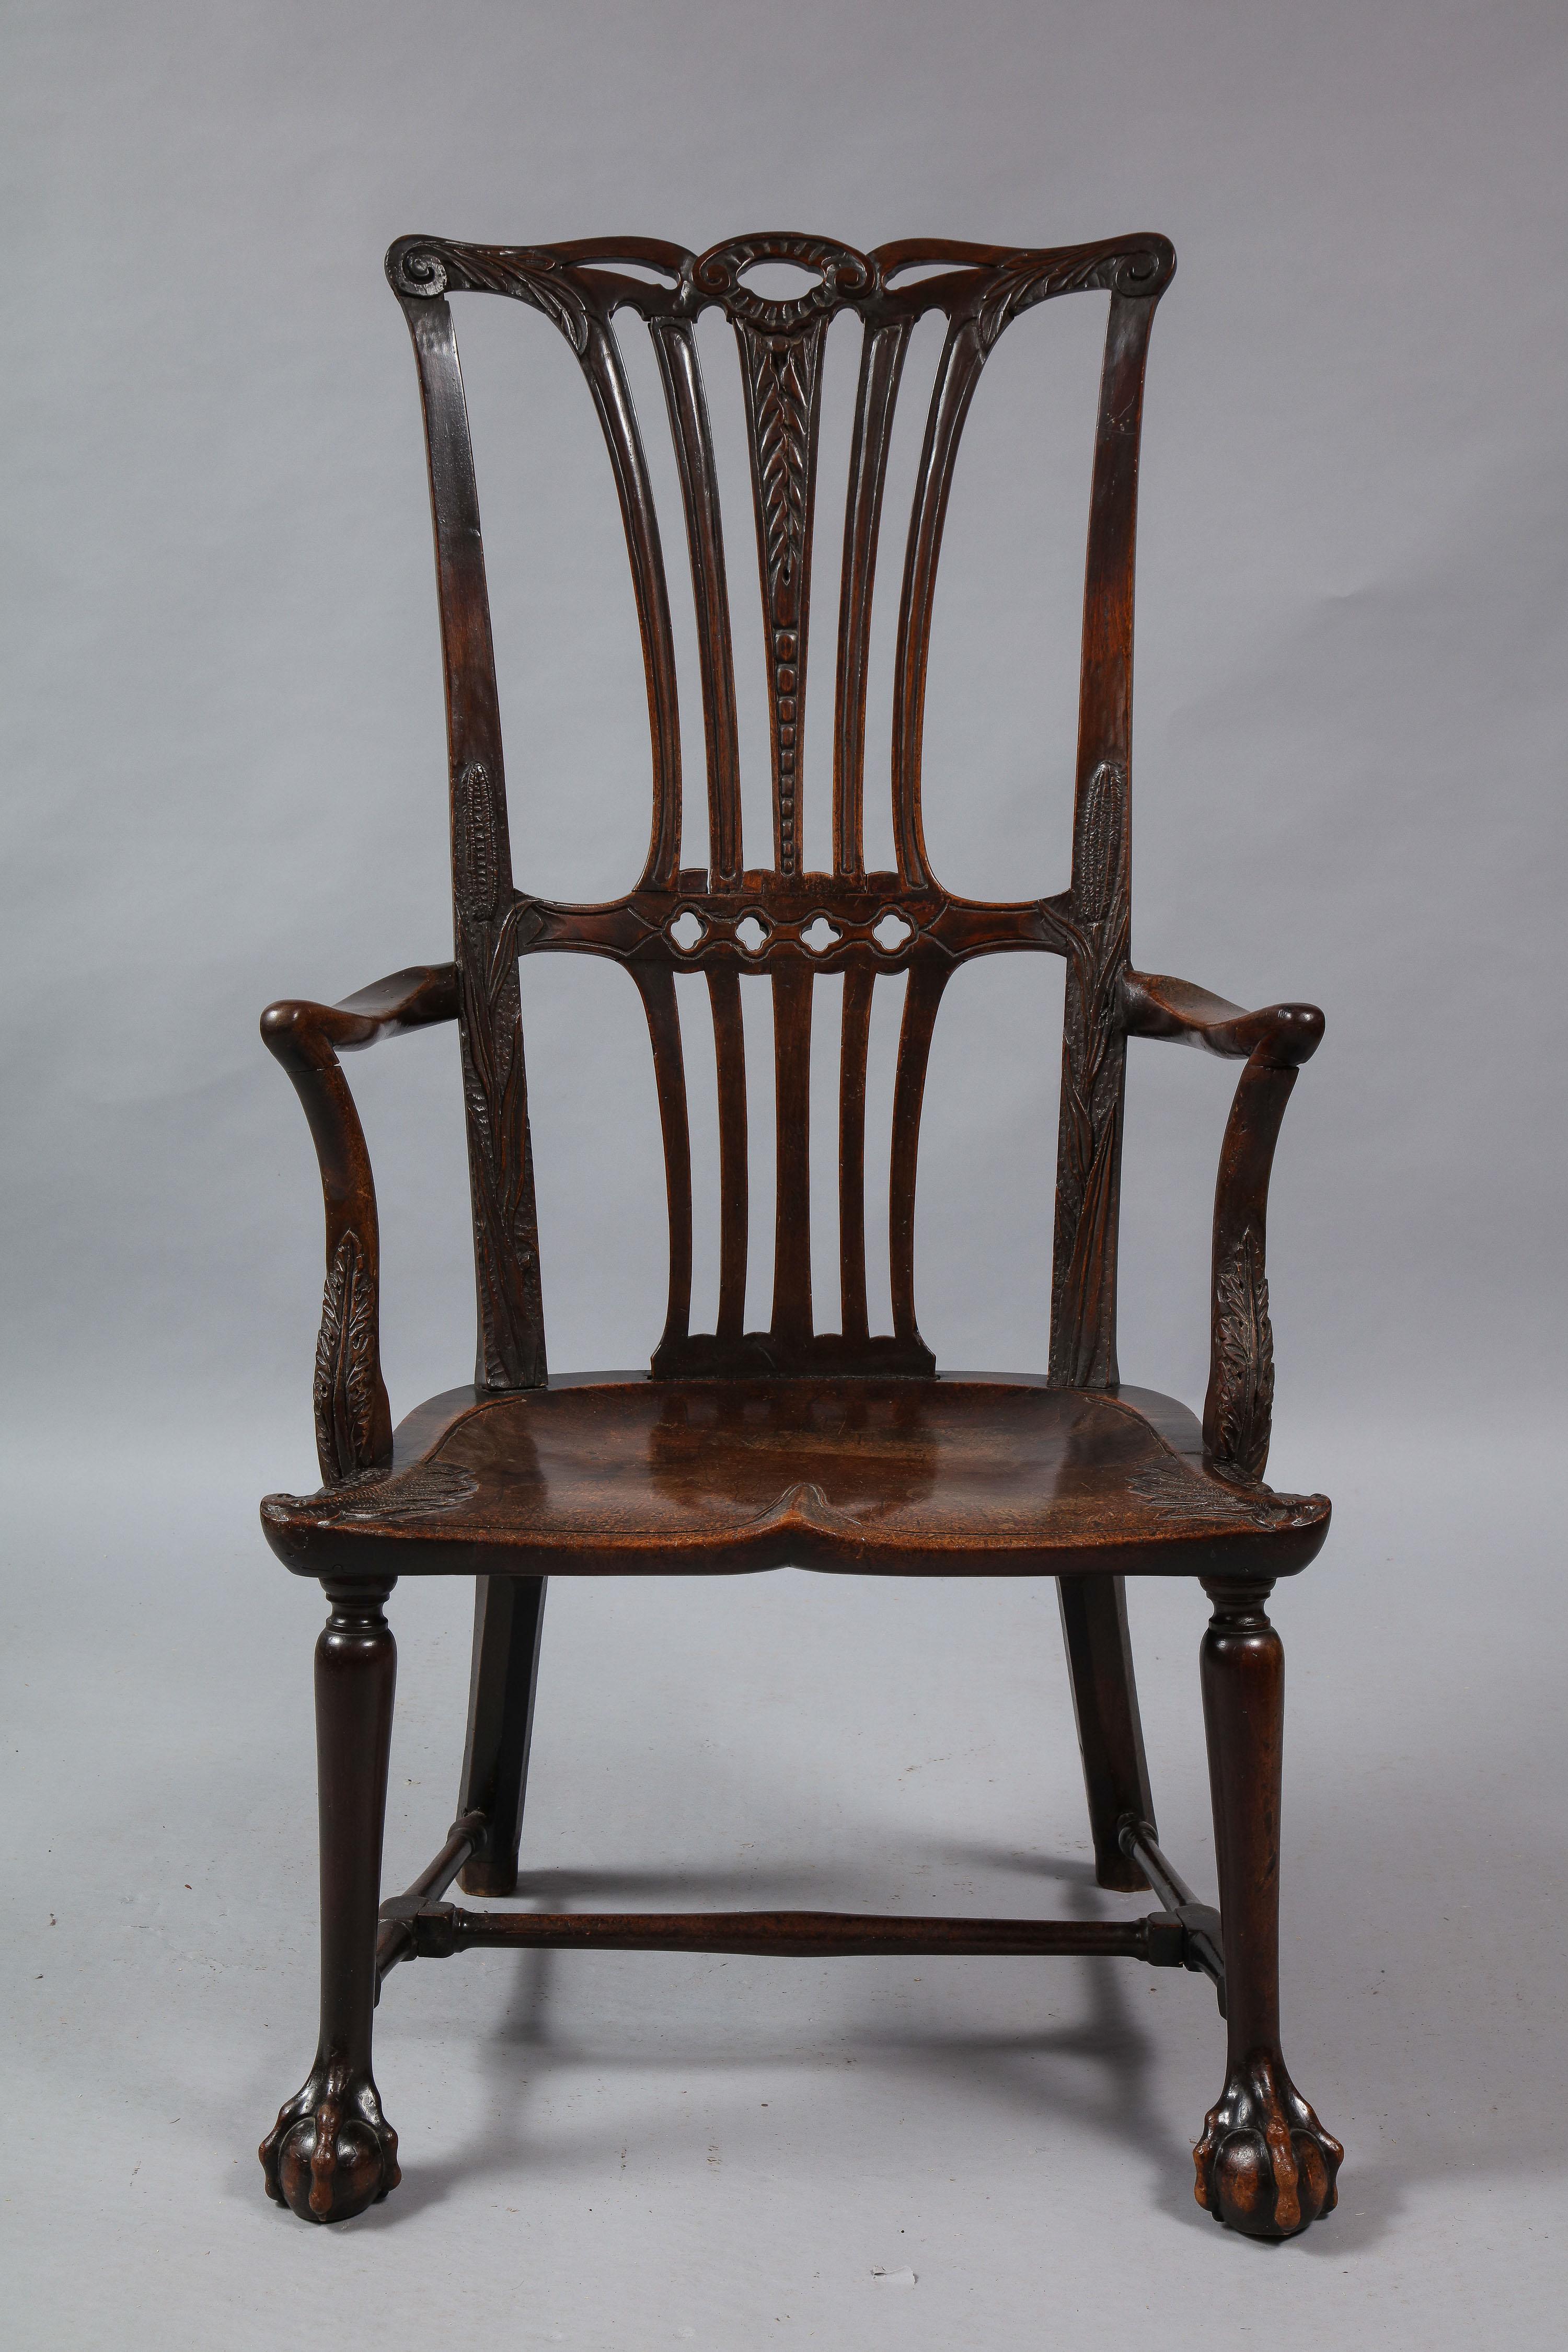 Fine 18th century Irish library Windsor mahogany armchair, the pierced crest with scroll carved ears and acanthus leaf flourishes, the central splat with quatrefoil decoration and lobed segments, the central one with leaf and bead carved details,